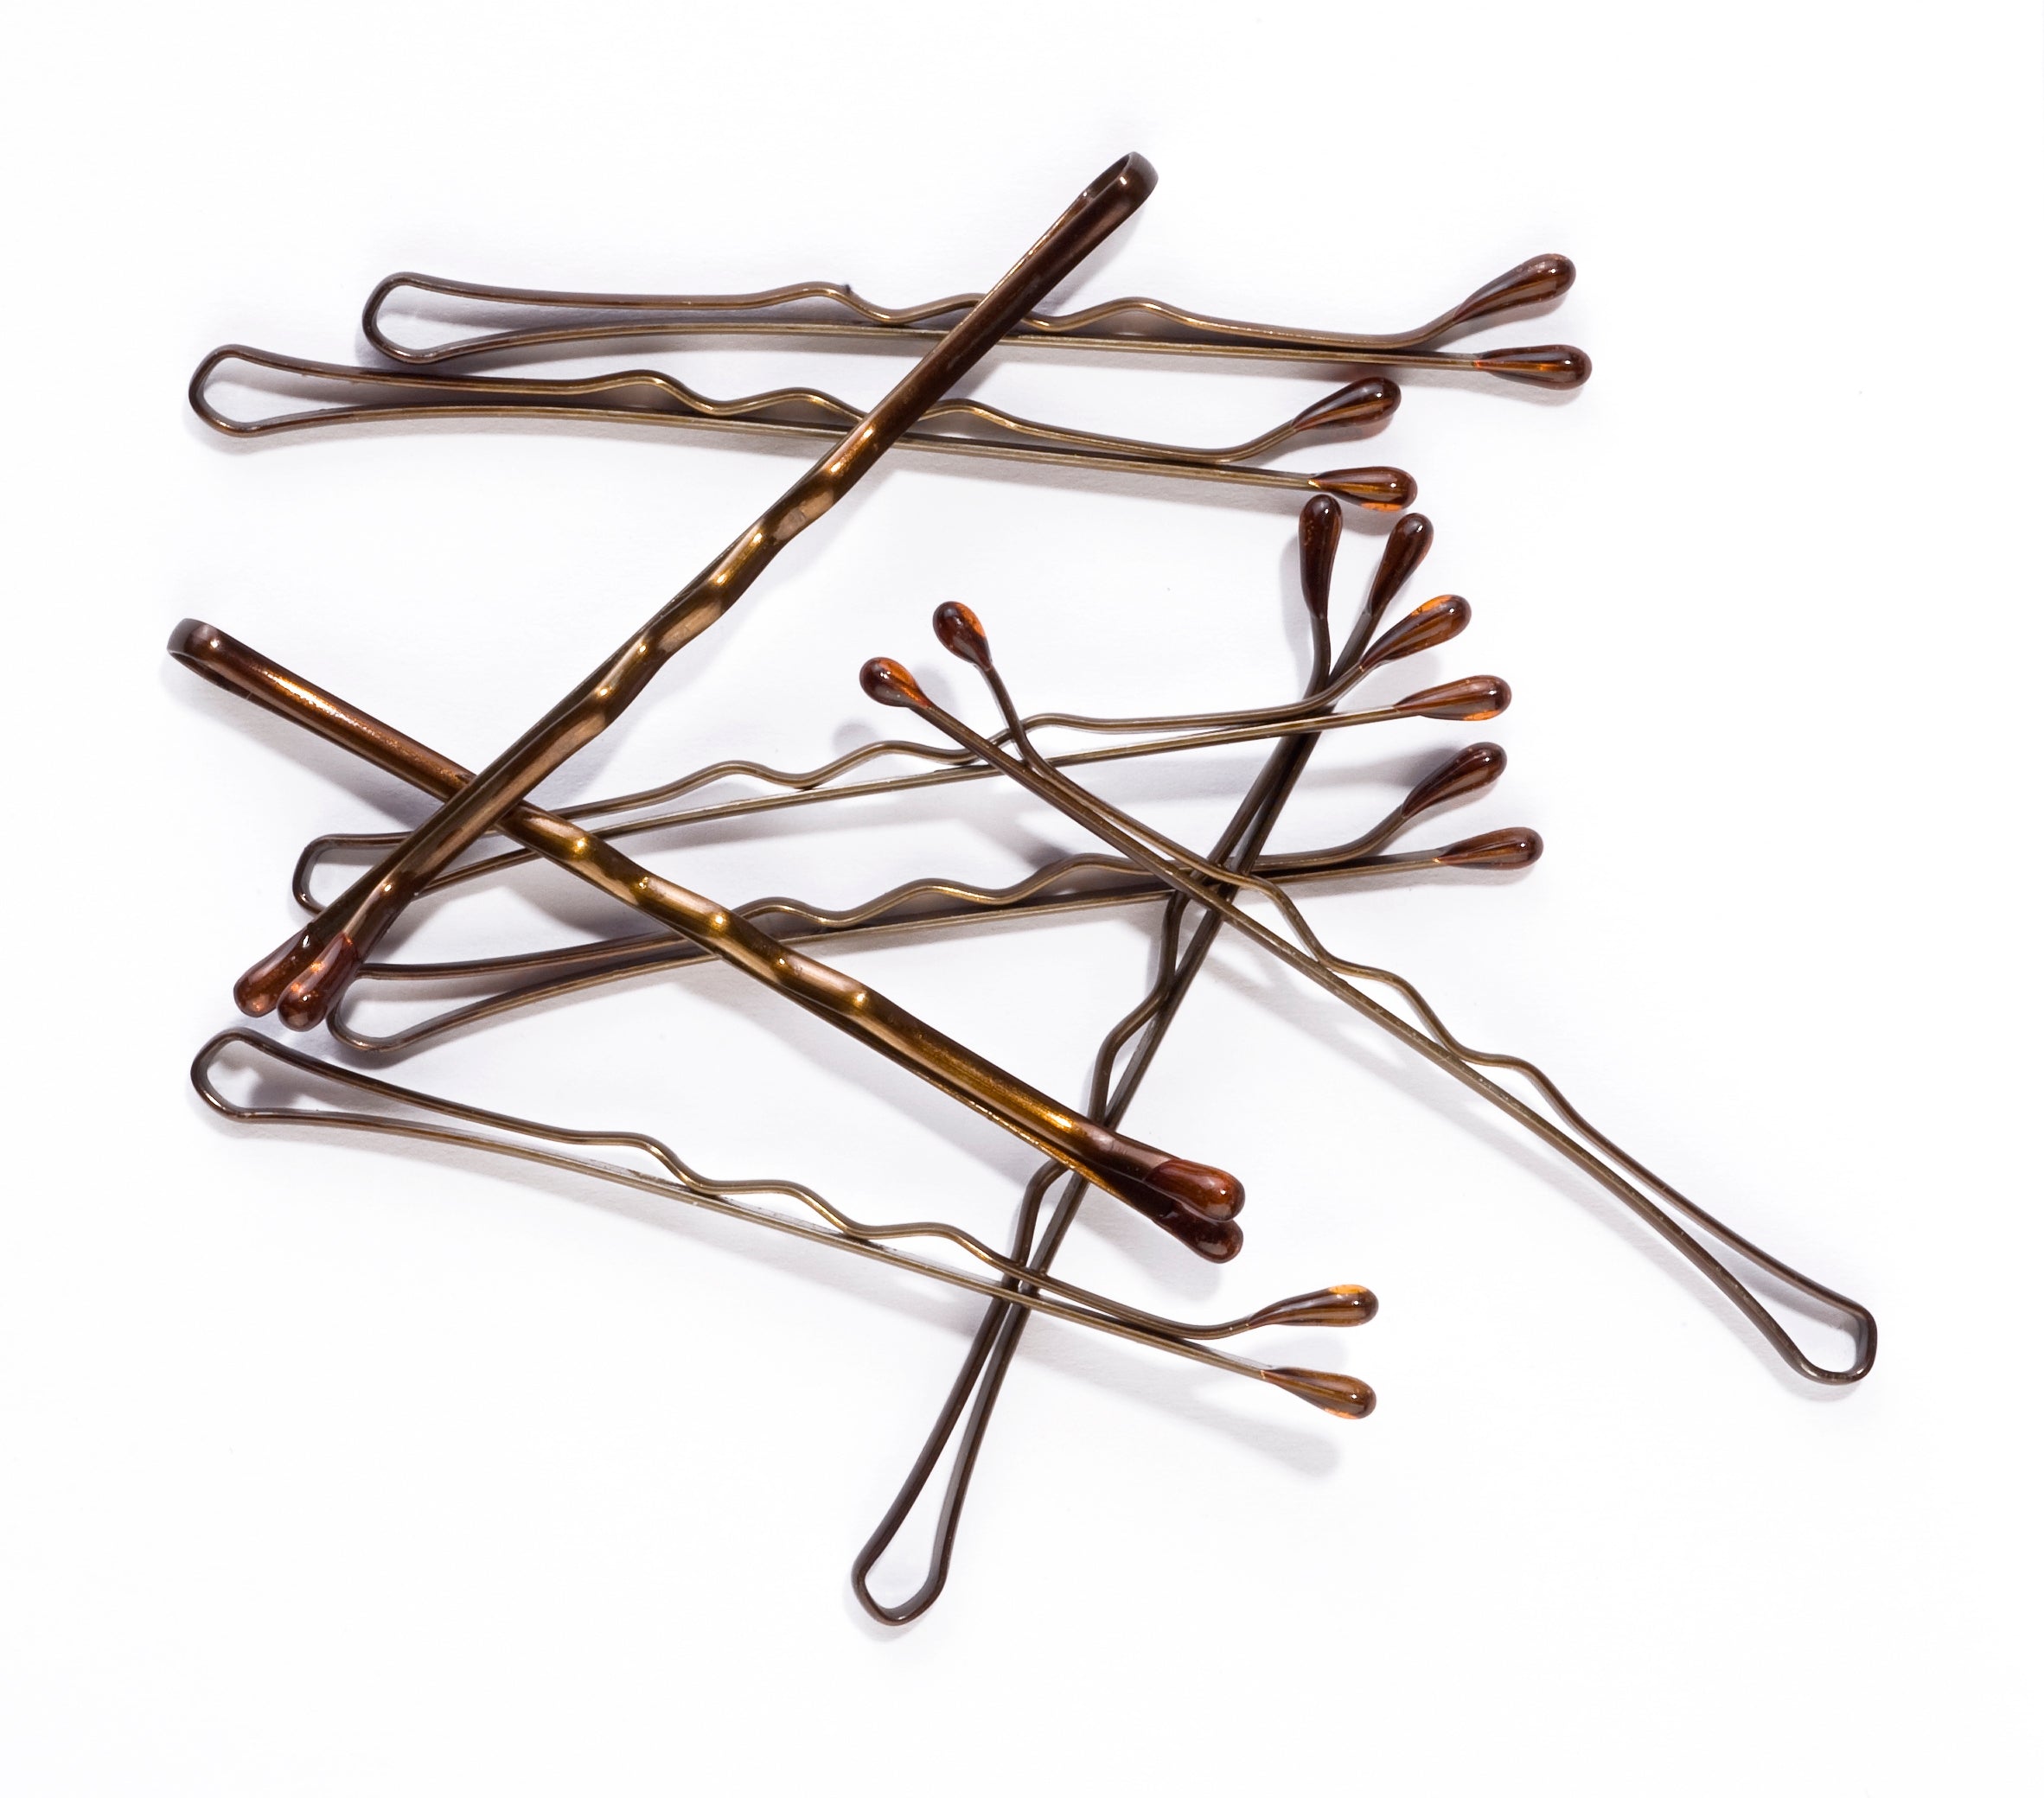 Mia Bobby Pins - Color Blends - Medium Brown and Dark Brown - 50 Pieces